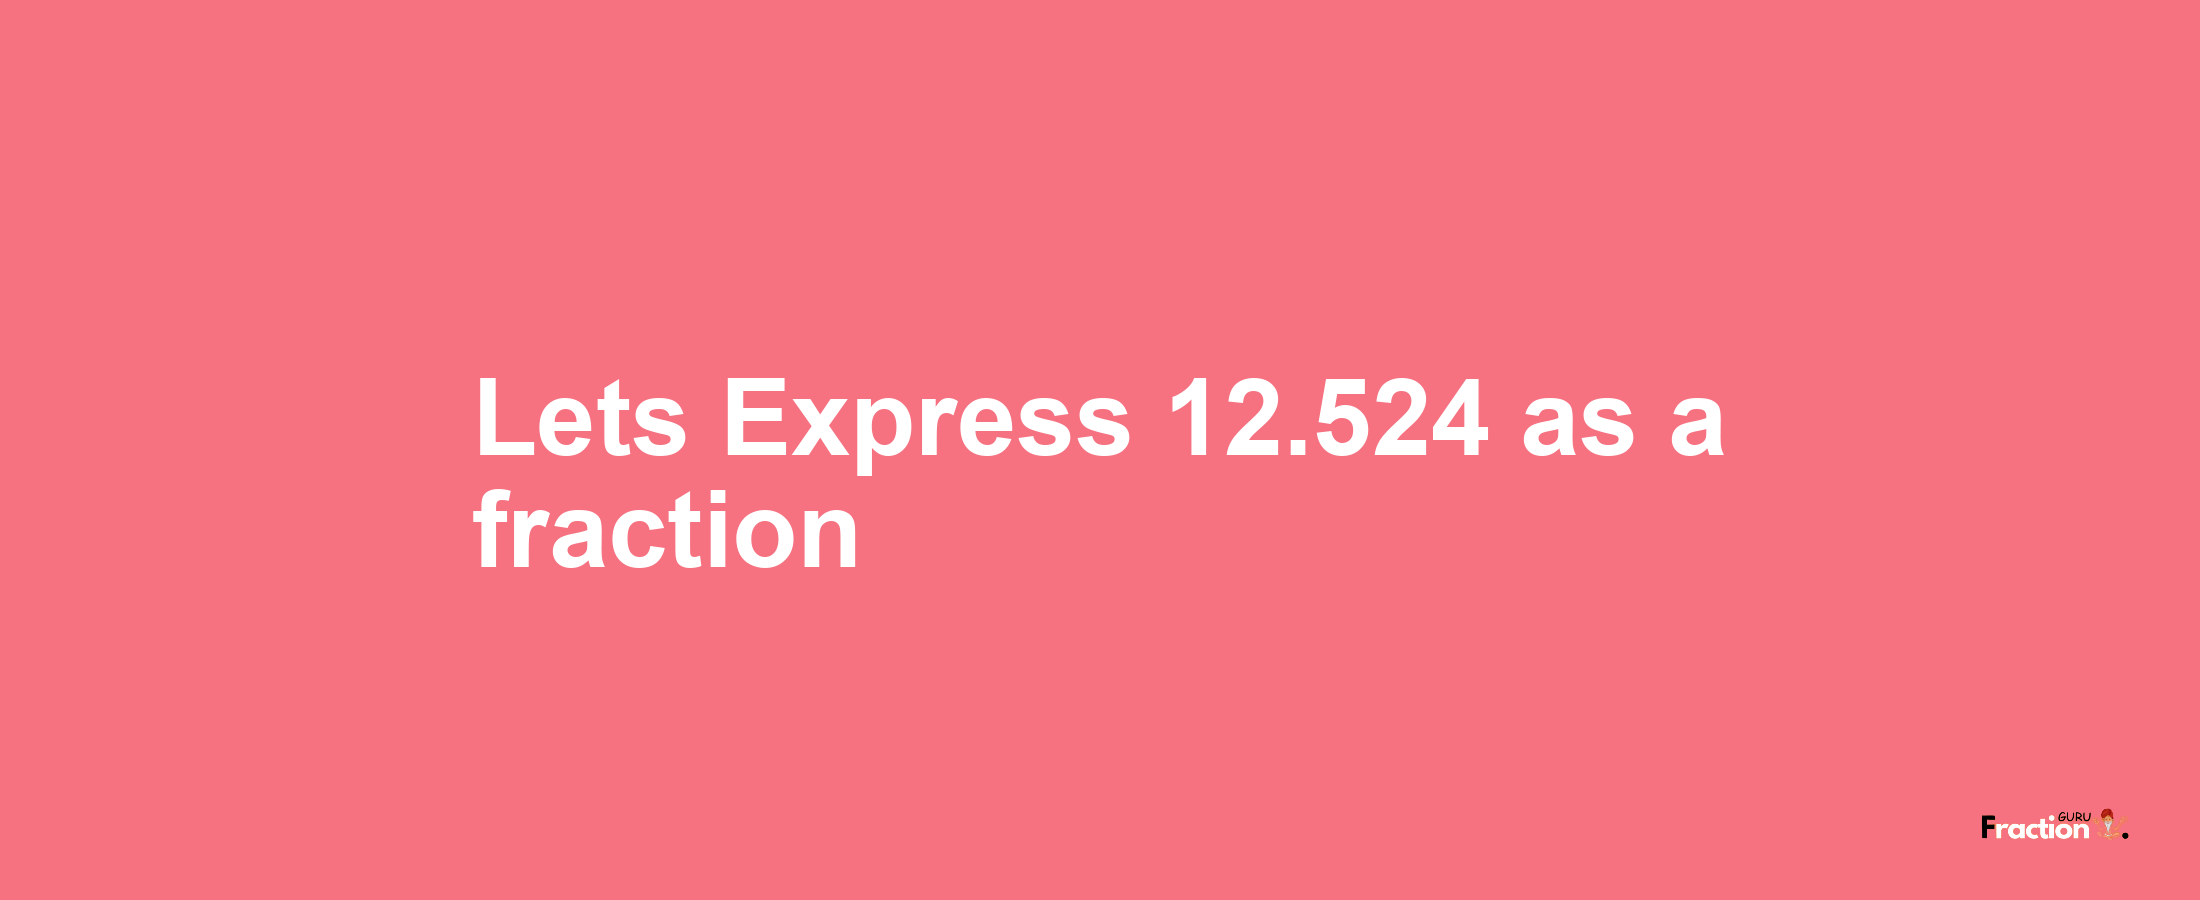 Lets Express 12.524 as afraction